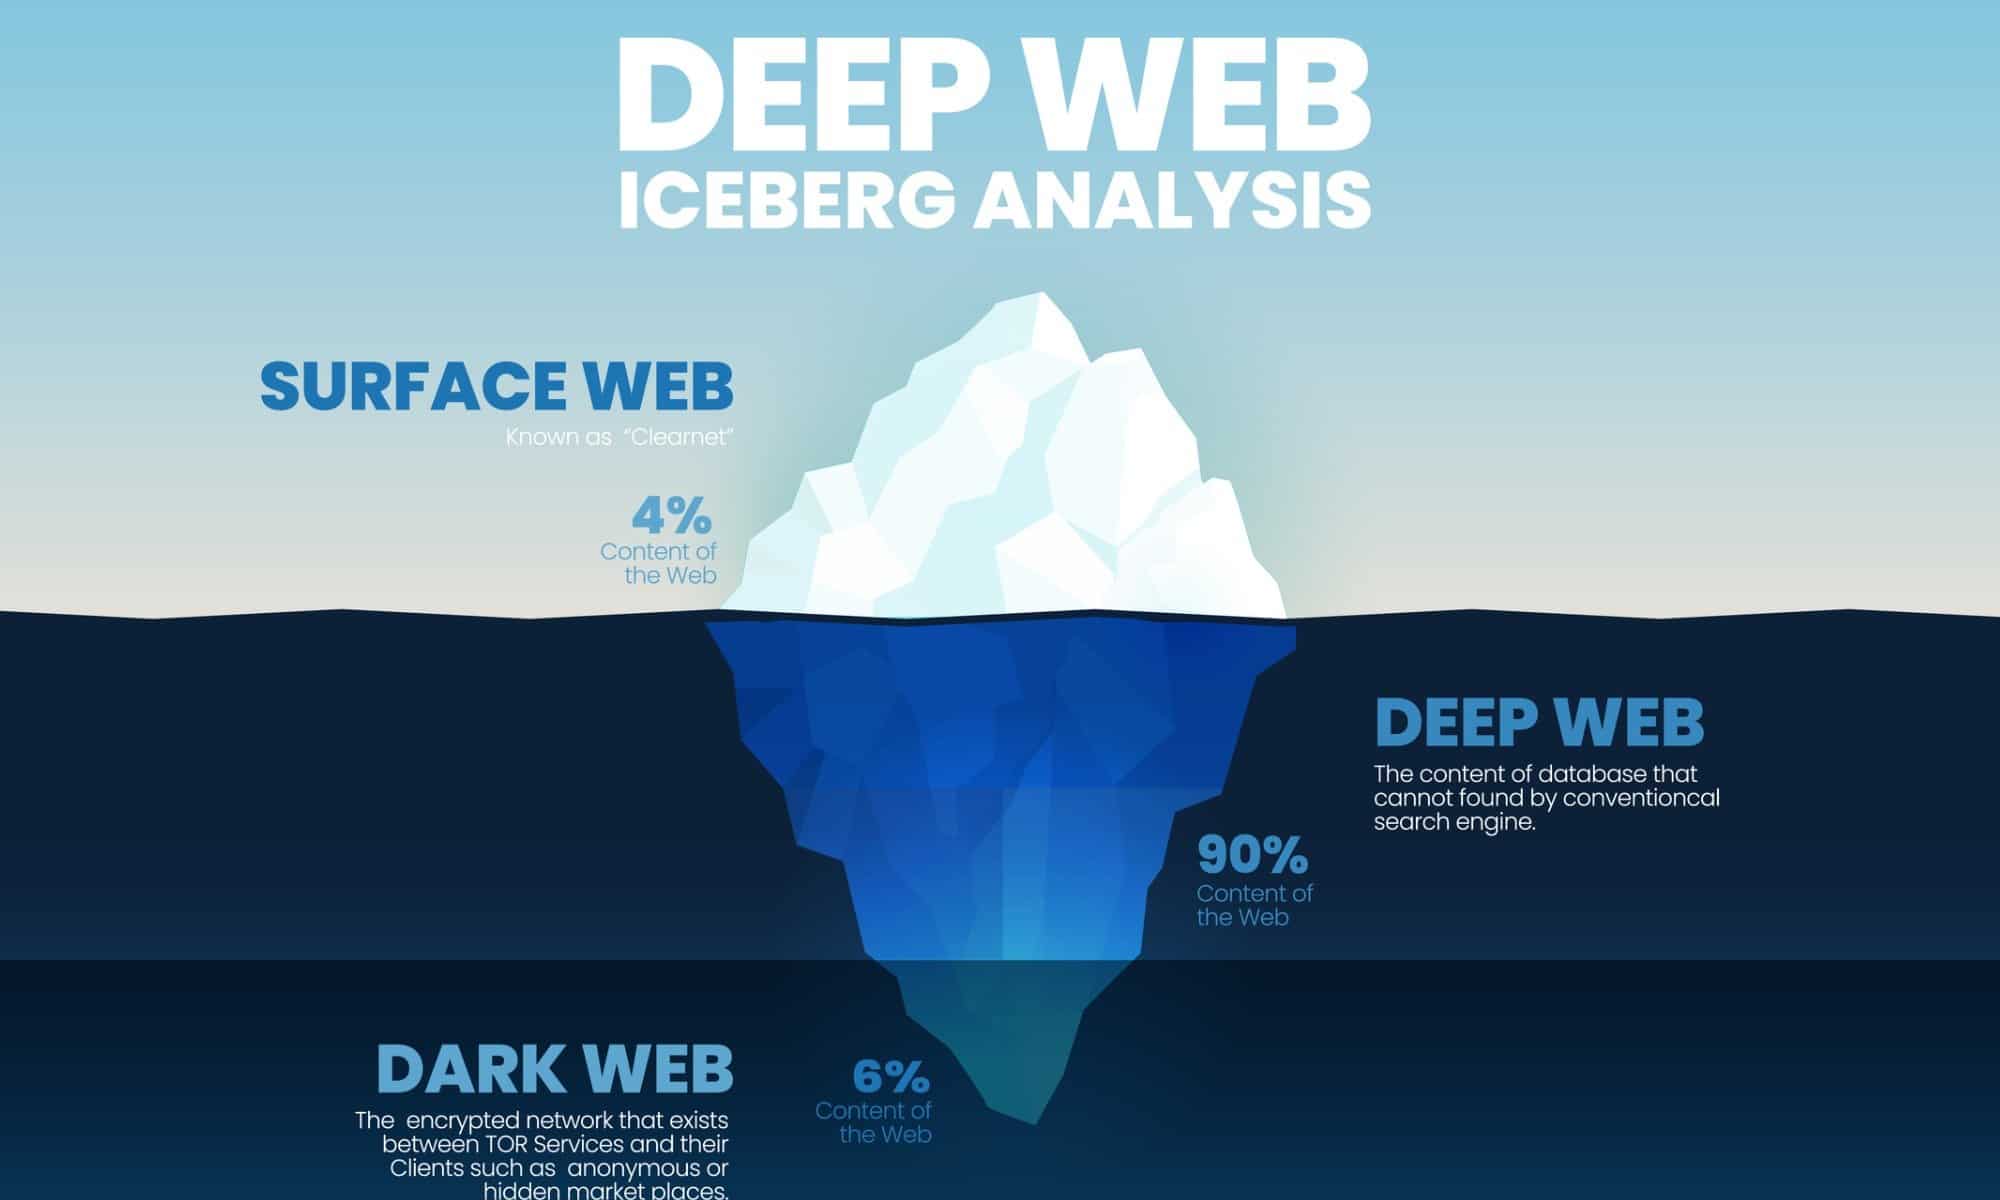 Is 90% of the internet the dark web?